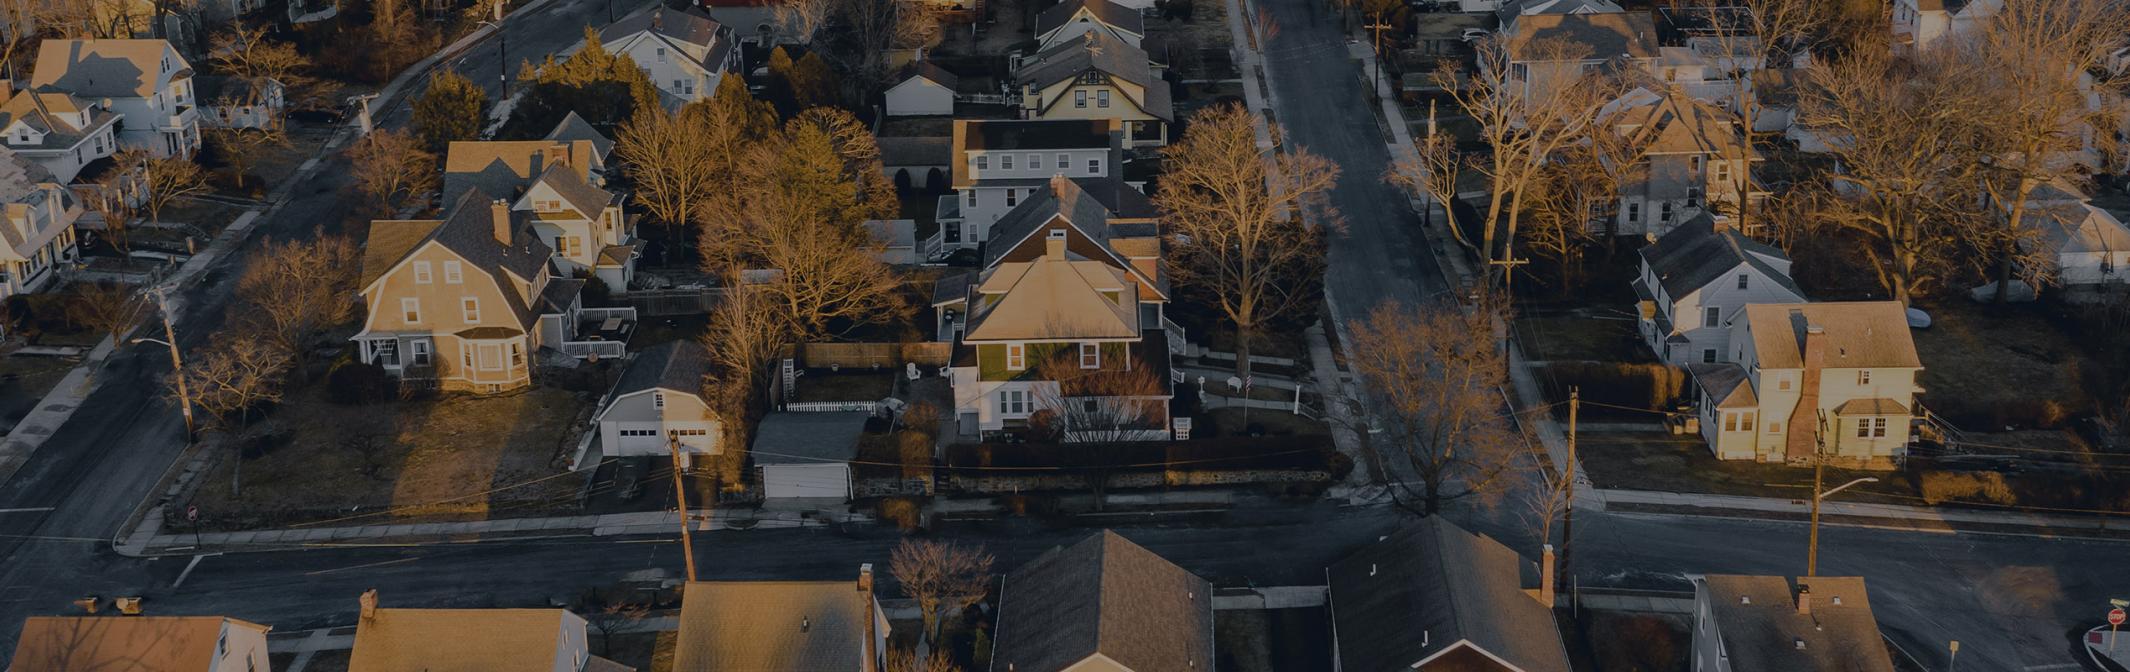 New England homes from above